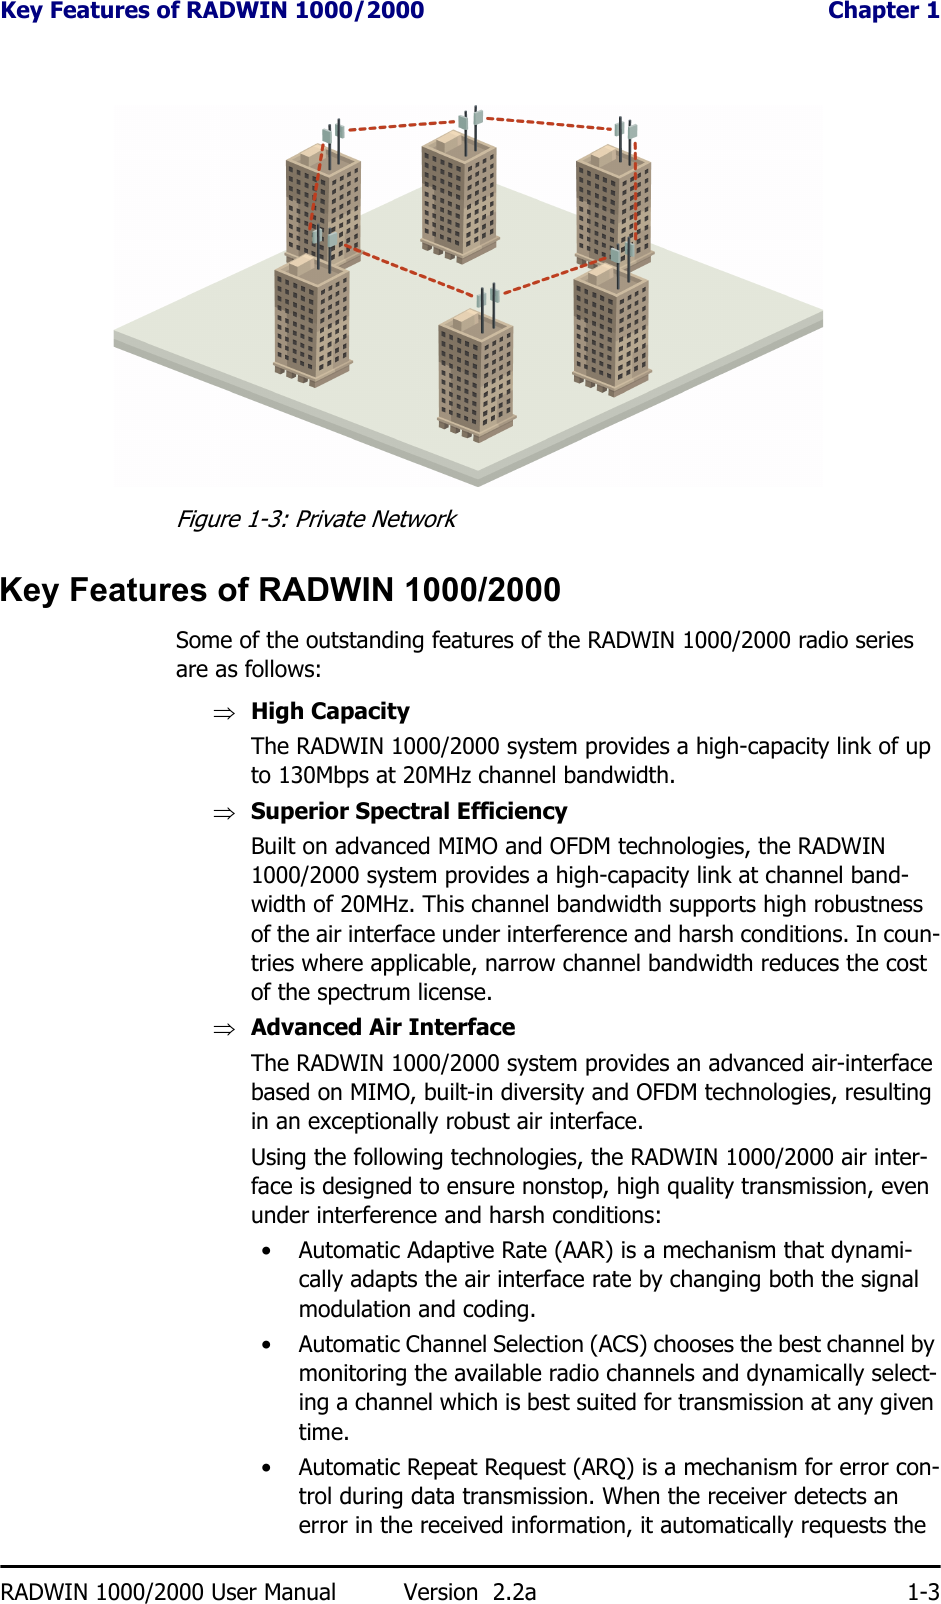 Key Features of RADWIN 1000/2000  Chapter 1RADWIN 1000/2000 User Manual Version  2.2a 1-3Figure 1-3: Private NetworkKey Features of RADWIN 1000/2000Some of the outstanding features of the RADWIN 1000/2000 radio series are as follows:⇒High CapacityThe RADWIN 1000/2000 system provides a high-capacity link of up to 130Mbps at 20MHz channel bandwidth.⇒Superior Spectral EfficiencyBuilt on advanced MIMO and OFDM technologies, the RADWIN 1000/2000 system provides a high-capacity link at channel band-width of 20MHz. This channel bandwidth supports high robustness of the air interface under interference and harsh conditions. In coun-tries where applicable, narrow channel bandwidth reduces the cost of the spectrum license.⇒Advanced Air InterfaceThe RADWIN 1000/2000 system provides an advanced air-interface based on MIMO, built-in diversity and OFDM technologies, resulting in an exceptionally robust air interface. Using the following technologies, the RADWIN 1000/2000 air inter-face is designed to ensure nonstop, high quality transmission, even under interference and harsh conditions:• Automatic Adaptive Rate (AAR) is a mechanism that dynami-cally adapts the air interface rate by changing both the signal modulation and coding.• Automatic Channel Selection (ACS) chooses the best channel by monitoring the available radio channels and dynamically select-ing a channel which is best suited for transmission at any given time.• Automatic Repeat Request (ARQ) is a mechanism for error con-trol during data transmission. When the receiver detects an error in the received information, it automatically requests the 